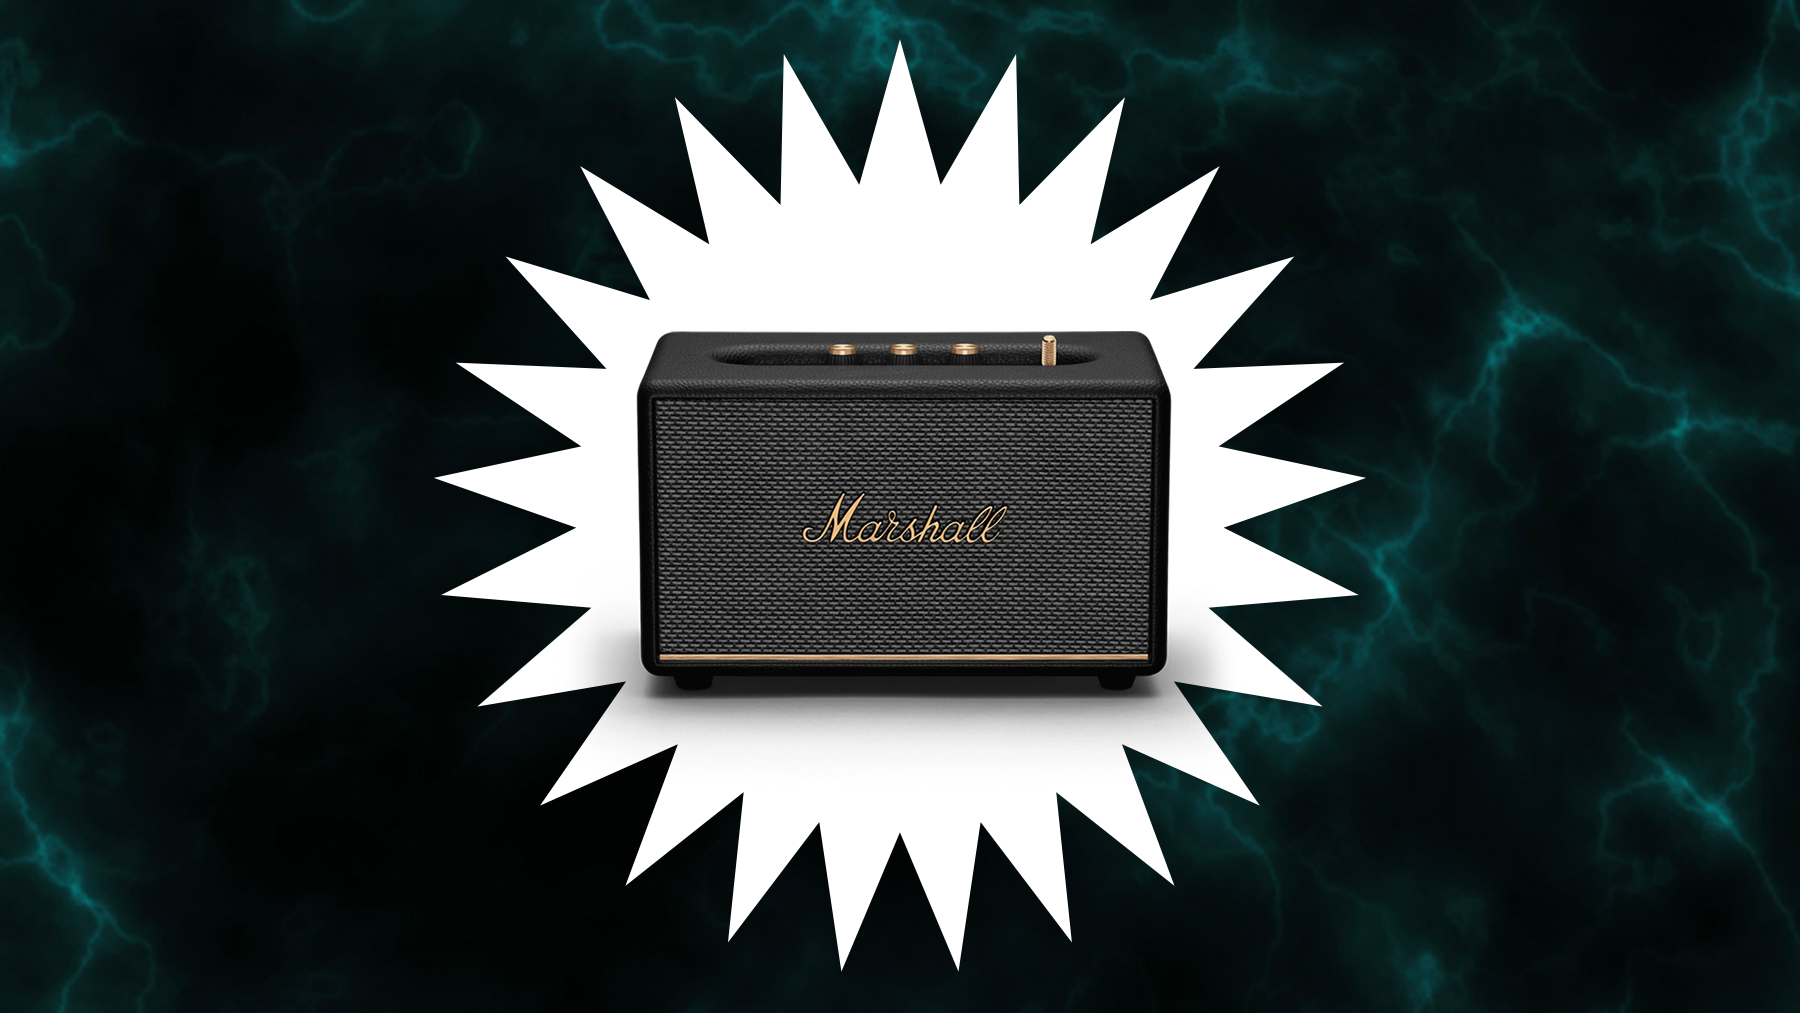 Marshall Acton III review - Which?